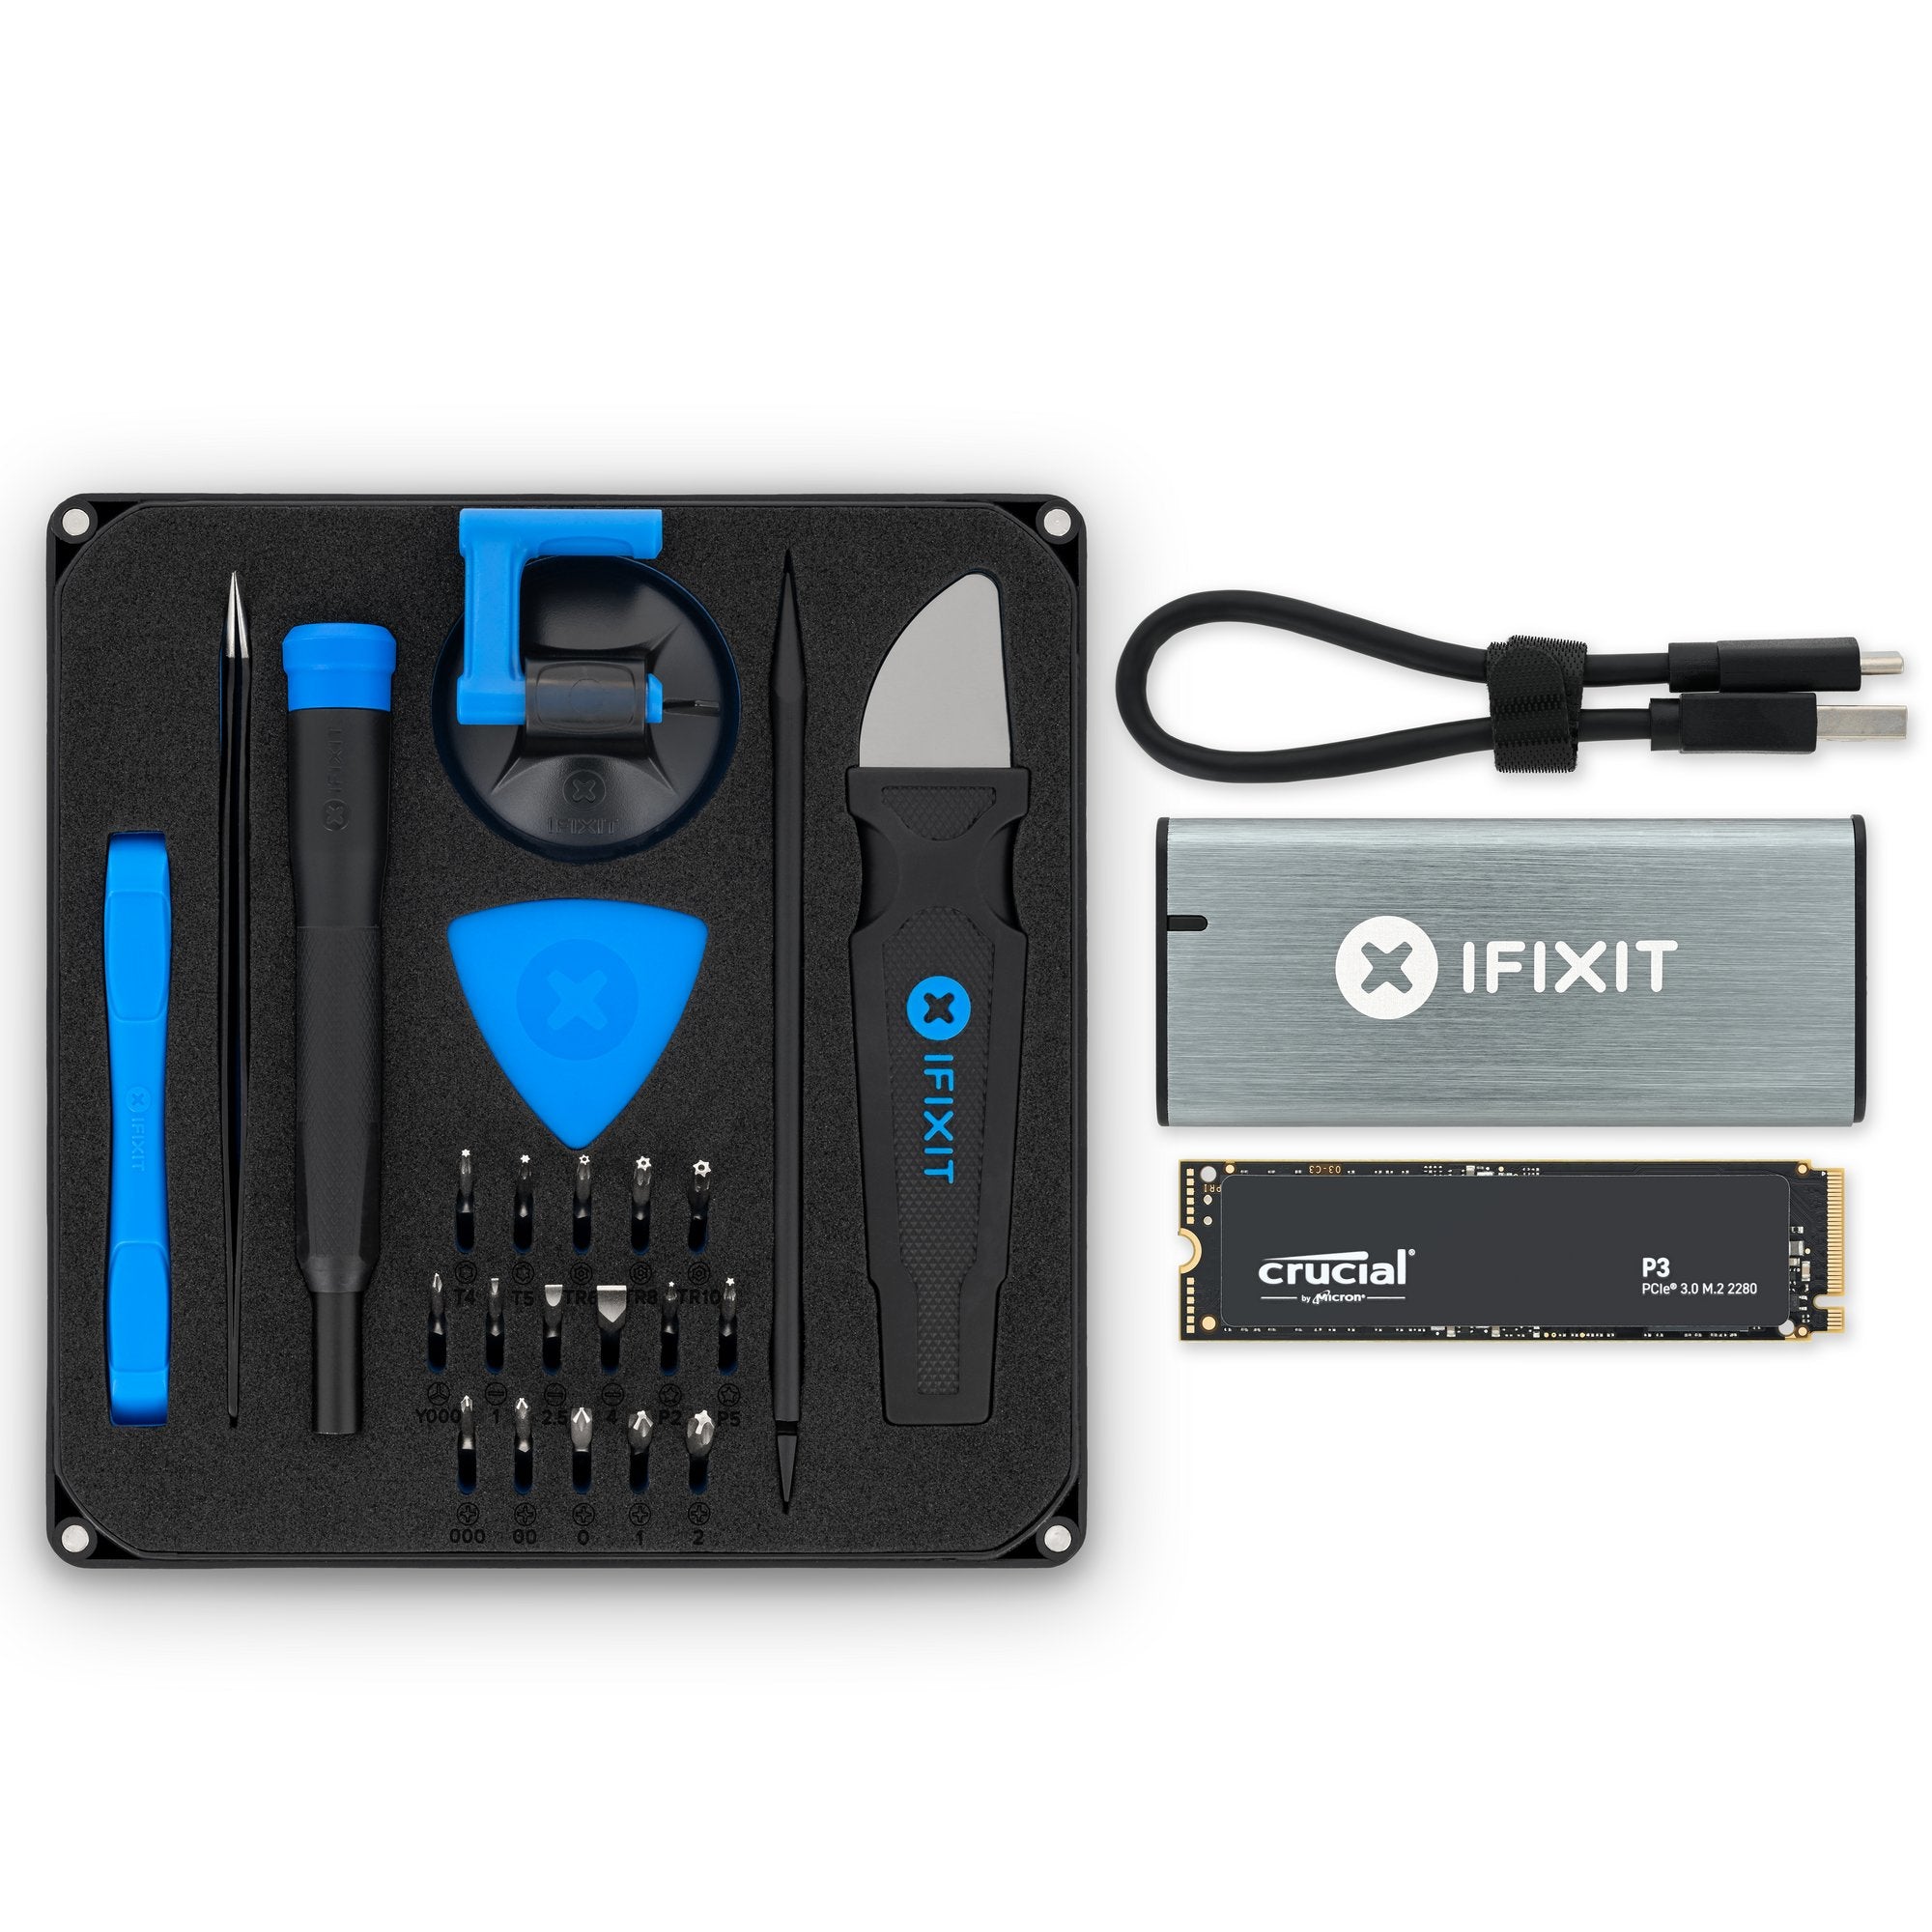 Crucial P3 M.2 2280 SSD—Your complete iFixit Fix Kit: a Crucial